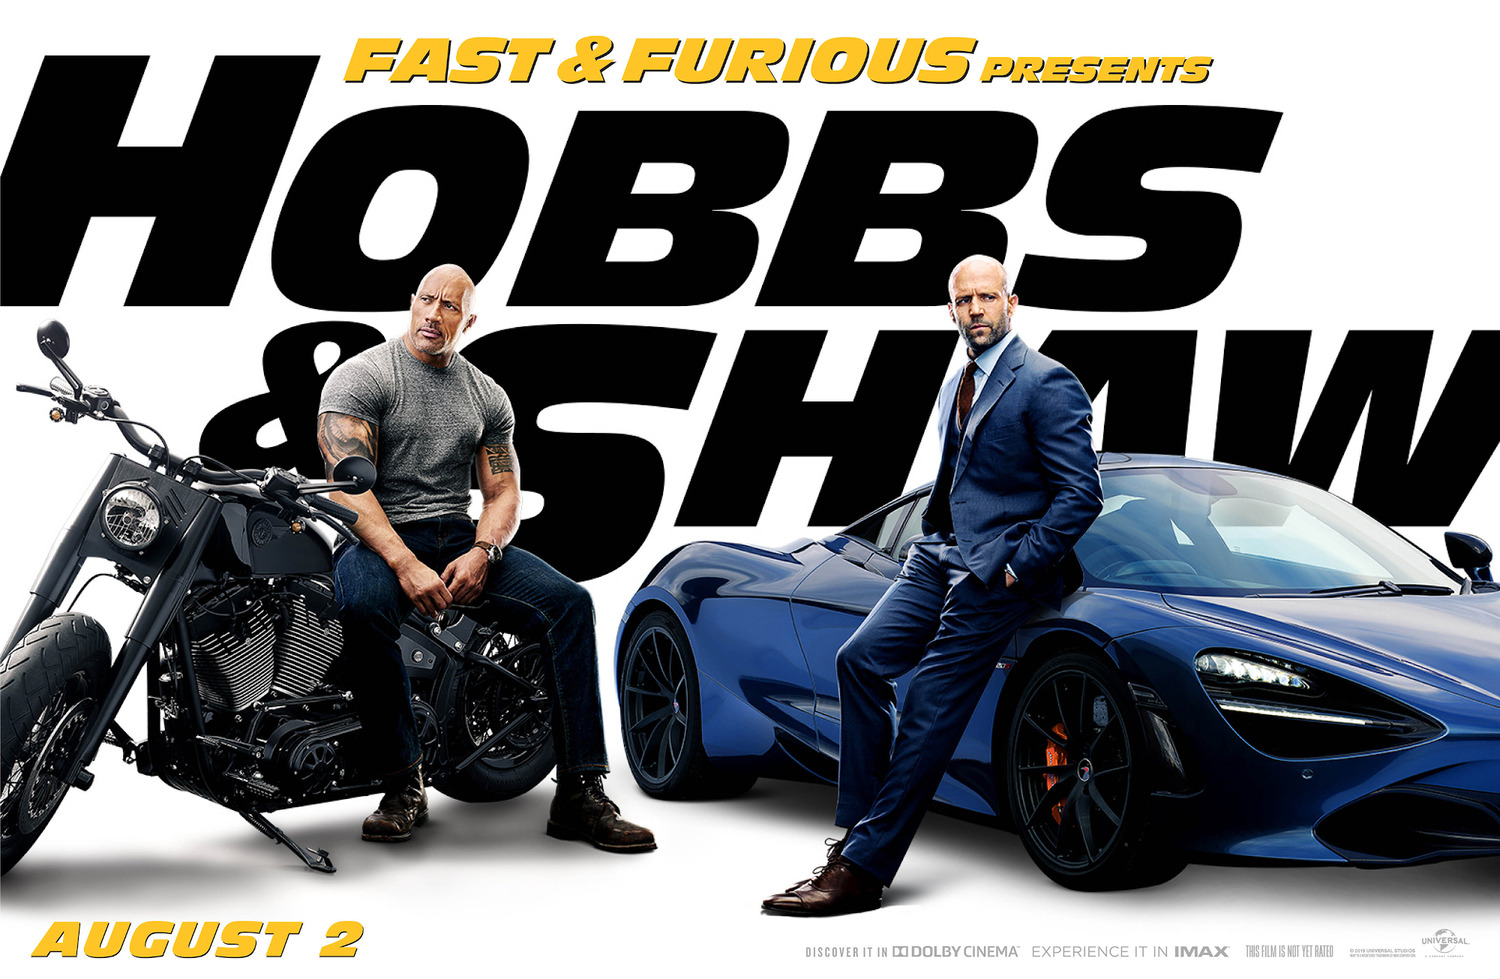 FAST & FURIOUS PRESENTS: HOBBS & SHAW Trailers, TV Spots, Clips ...